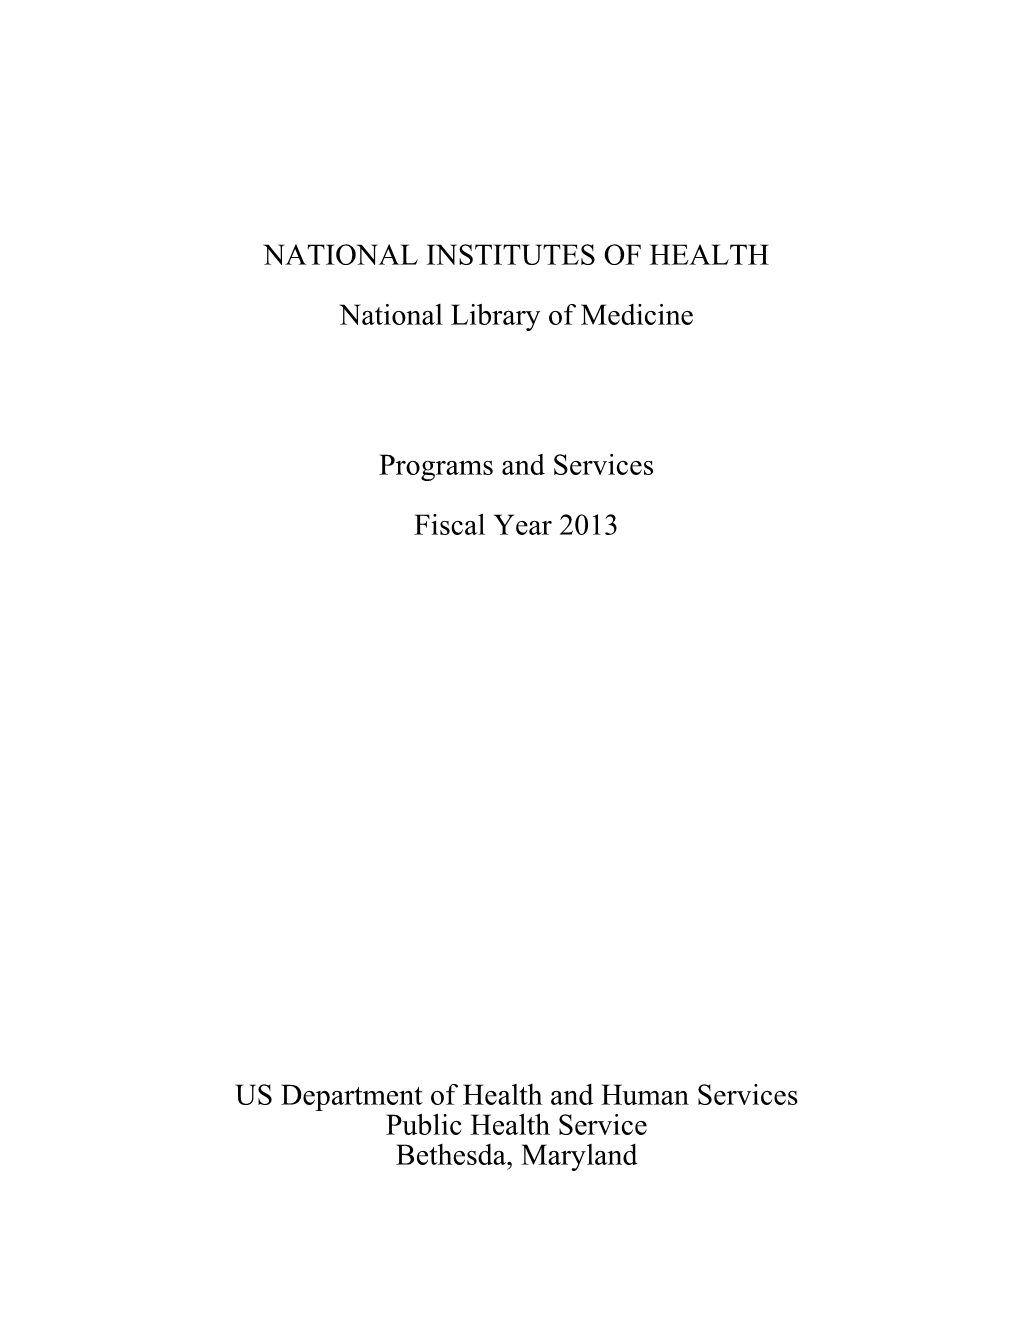 National Library of Medicine Programs and Services FY2013